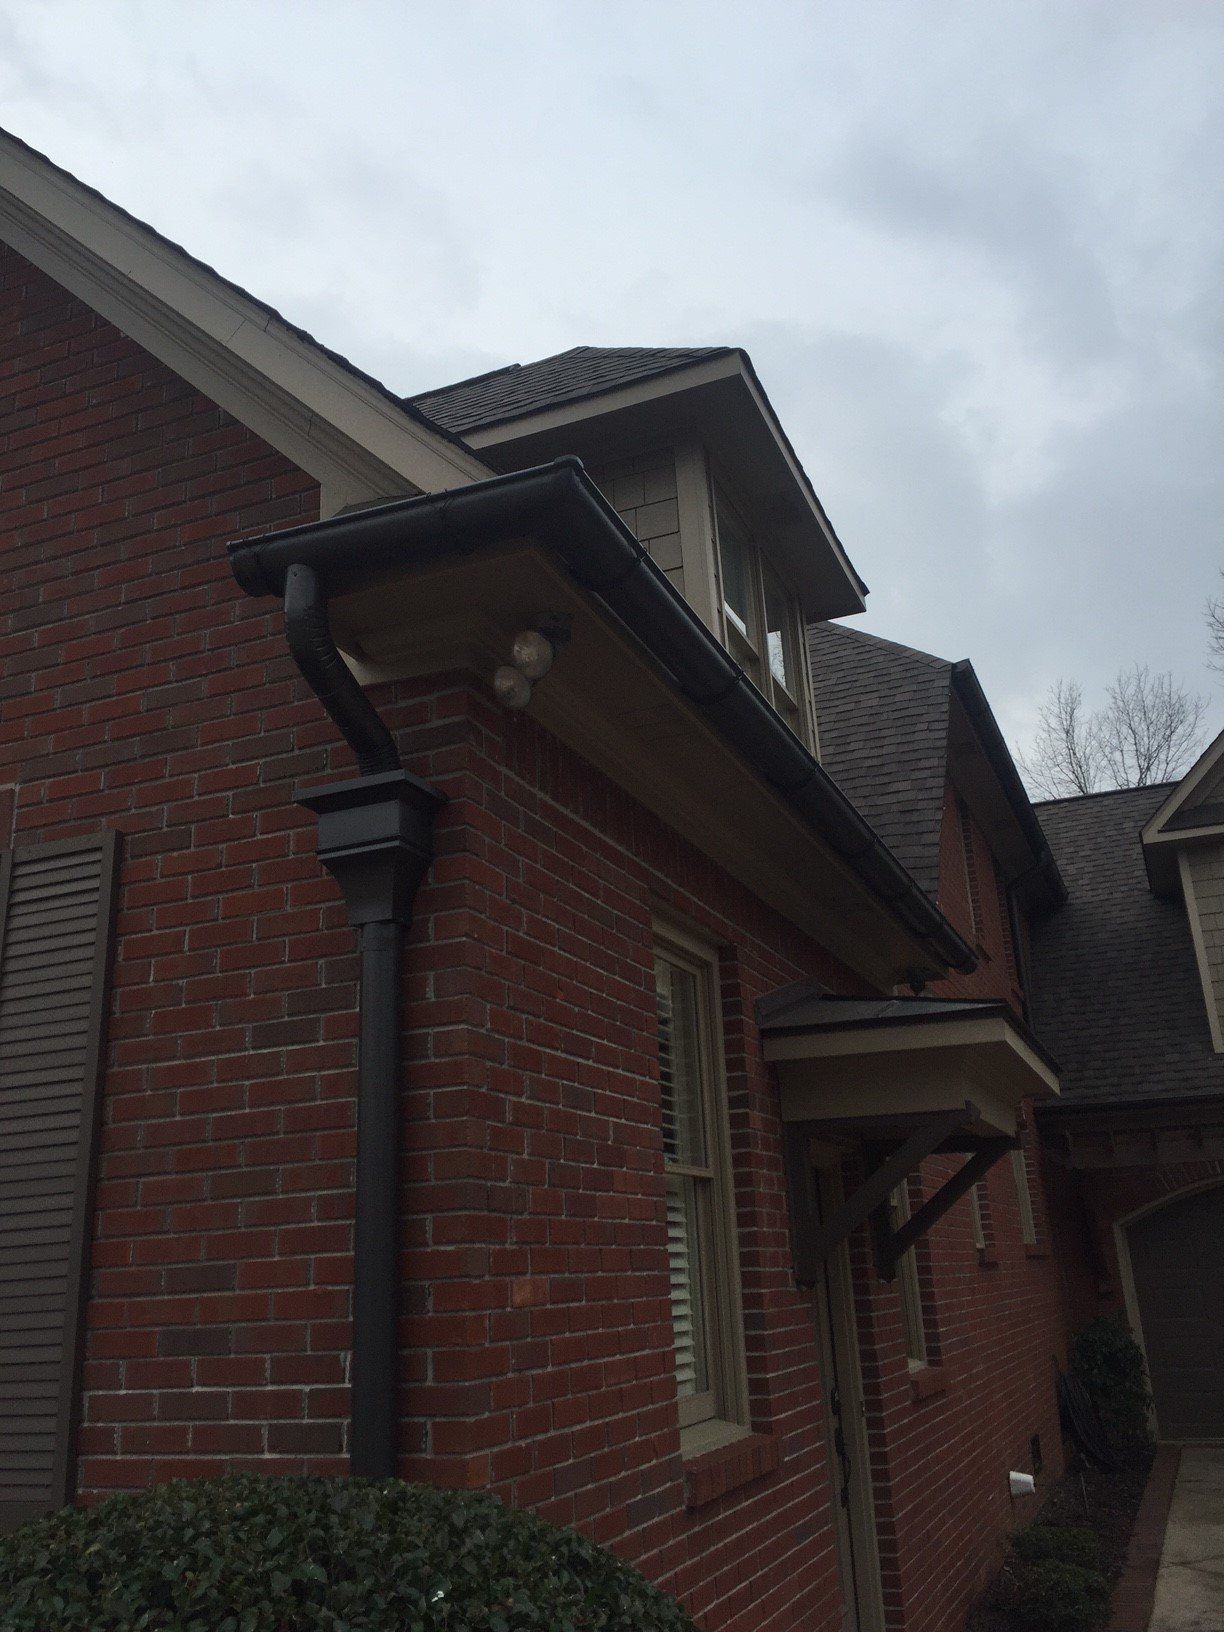 Roof, gutters, and downspout on brick home - B & B Roofing in Decatur, AL